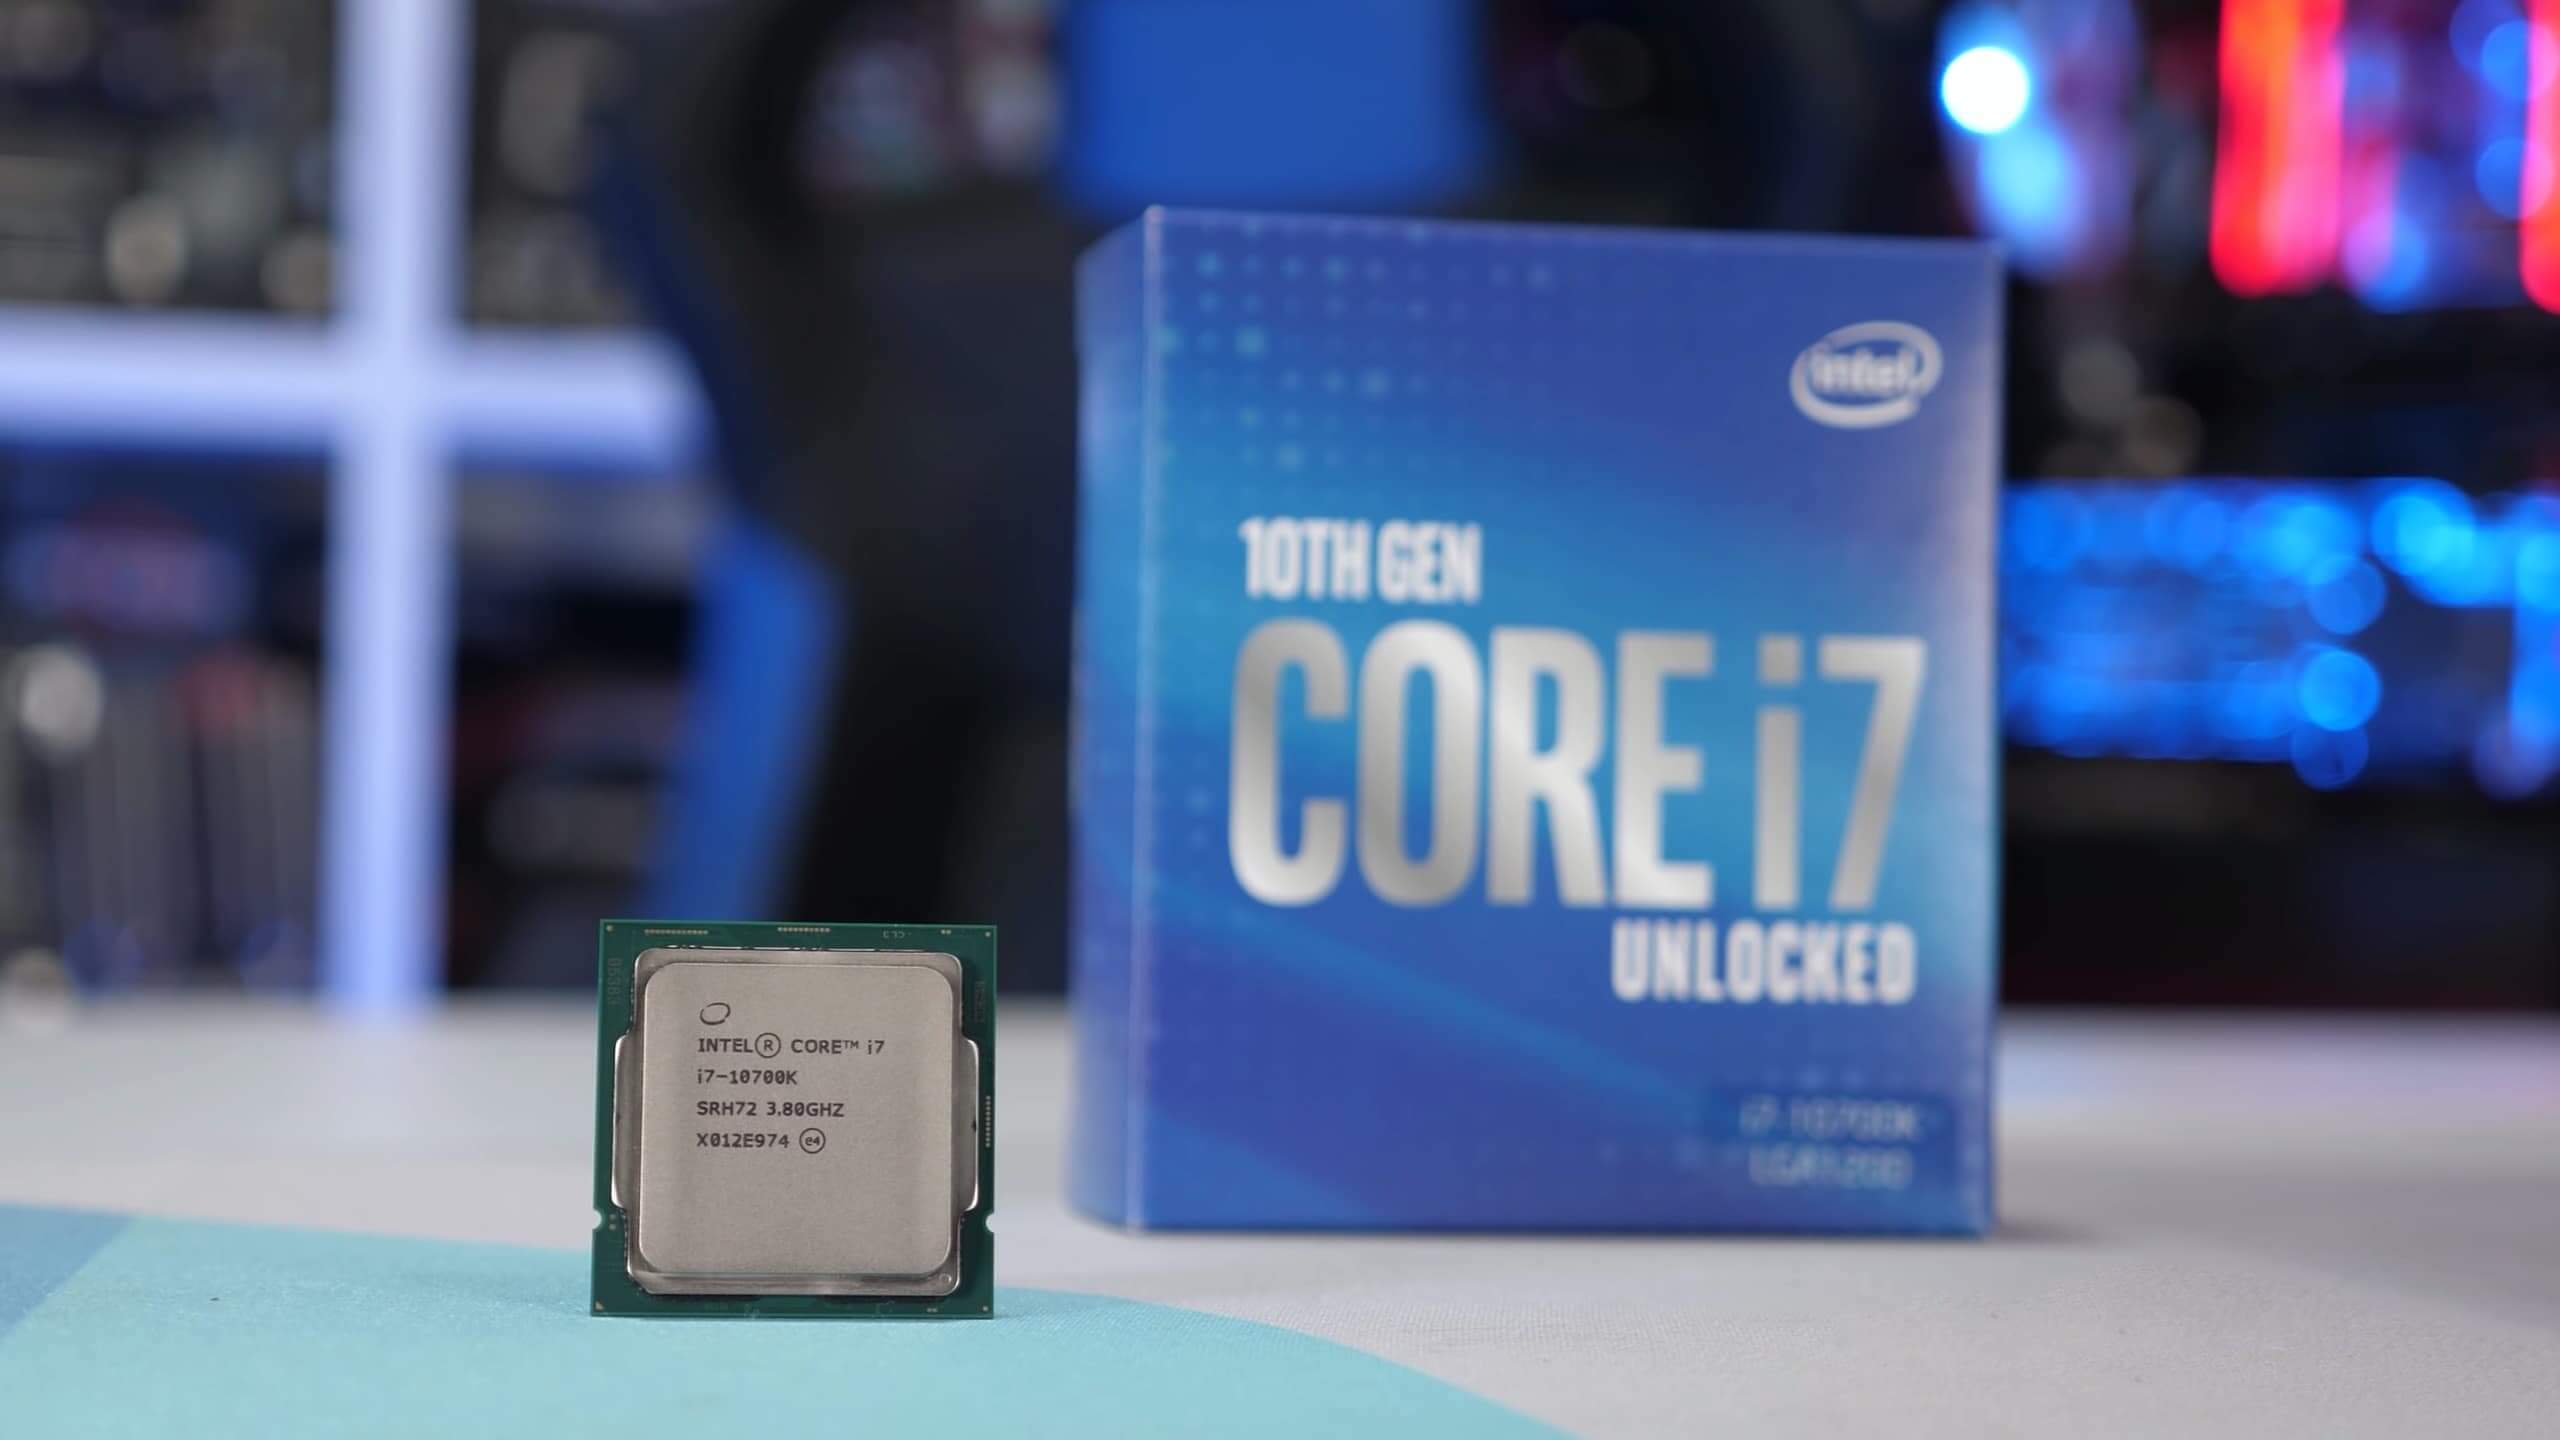 Intel cuts 10th-gen Comet Lake prices as AMD struggles with CPU shortages